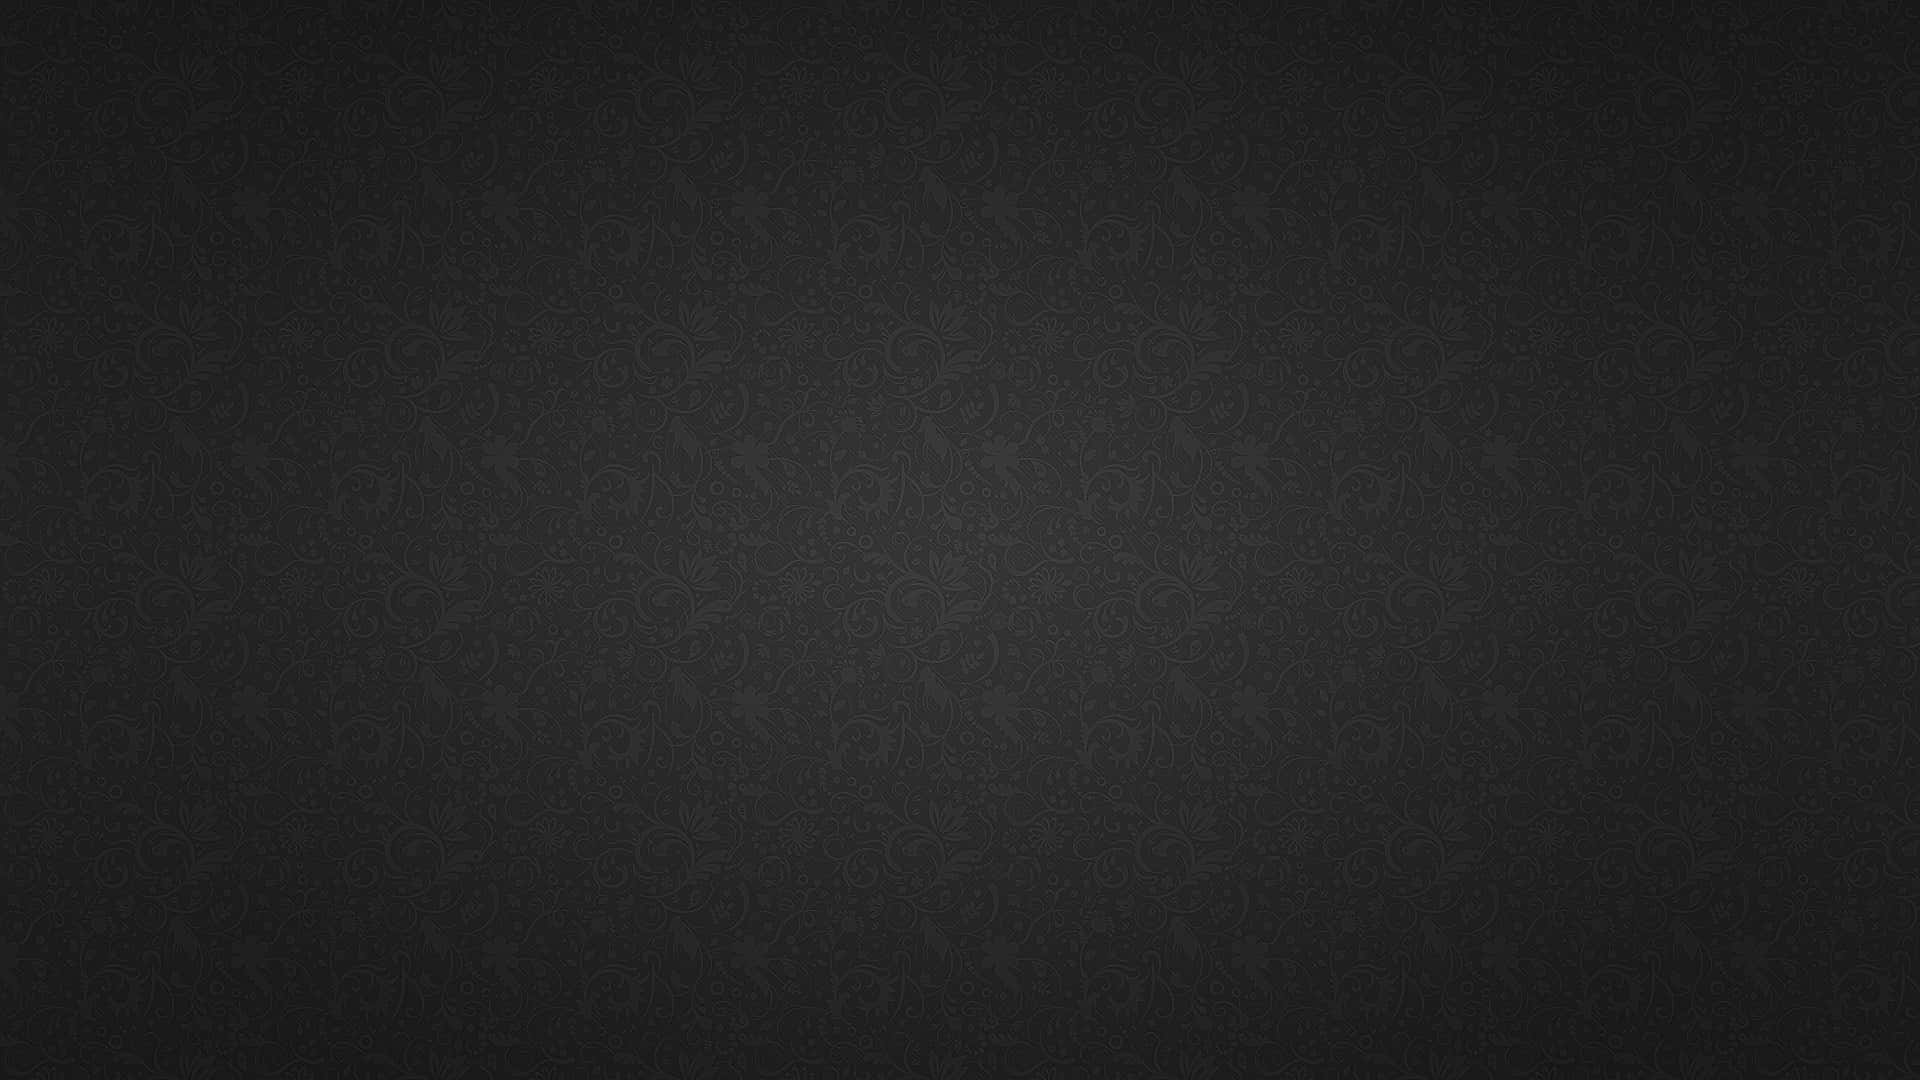 Add depth to your screen with this abstract dark texture background